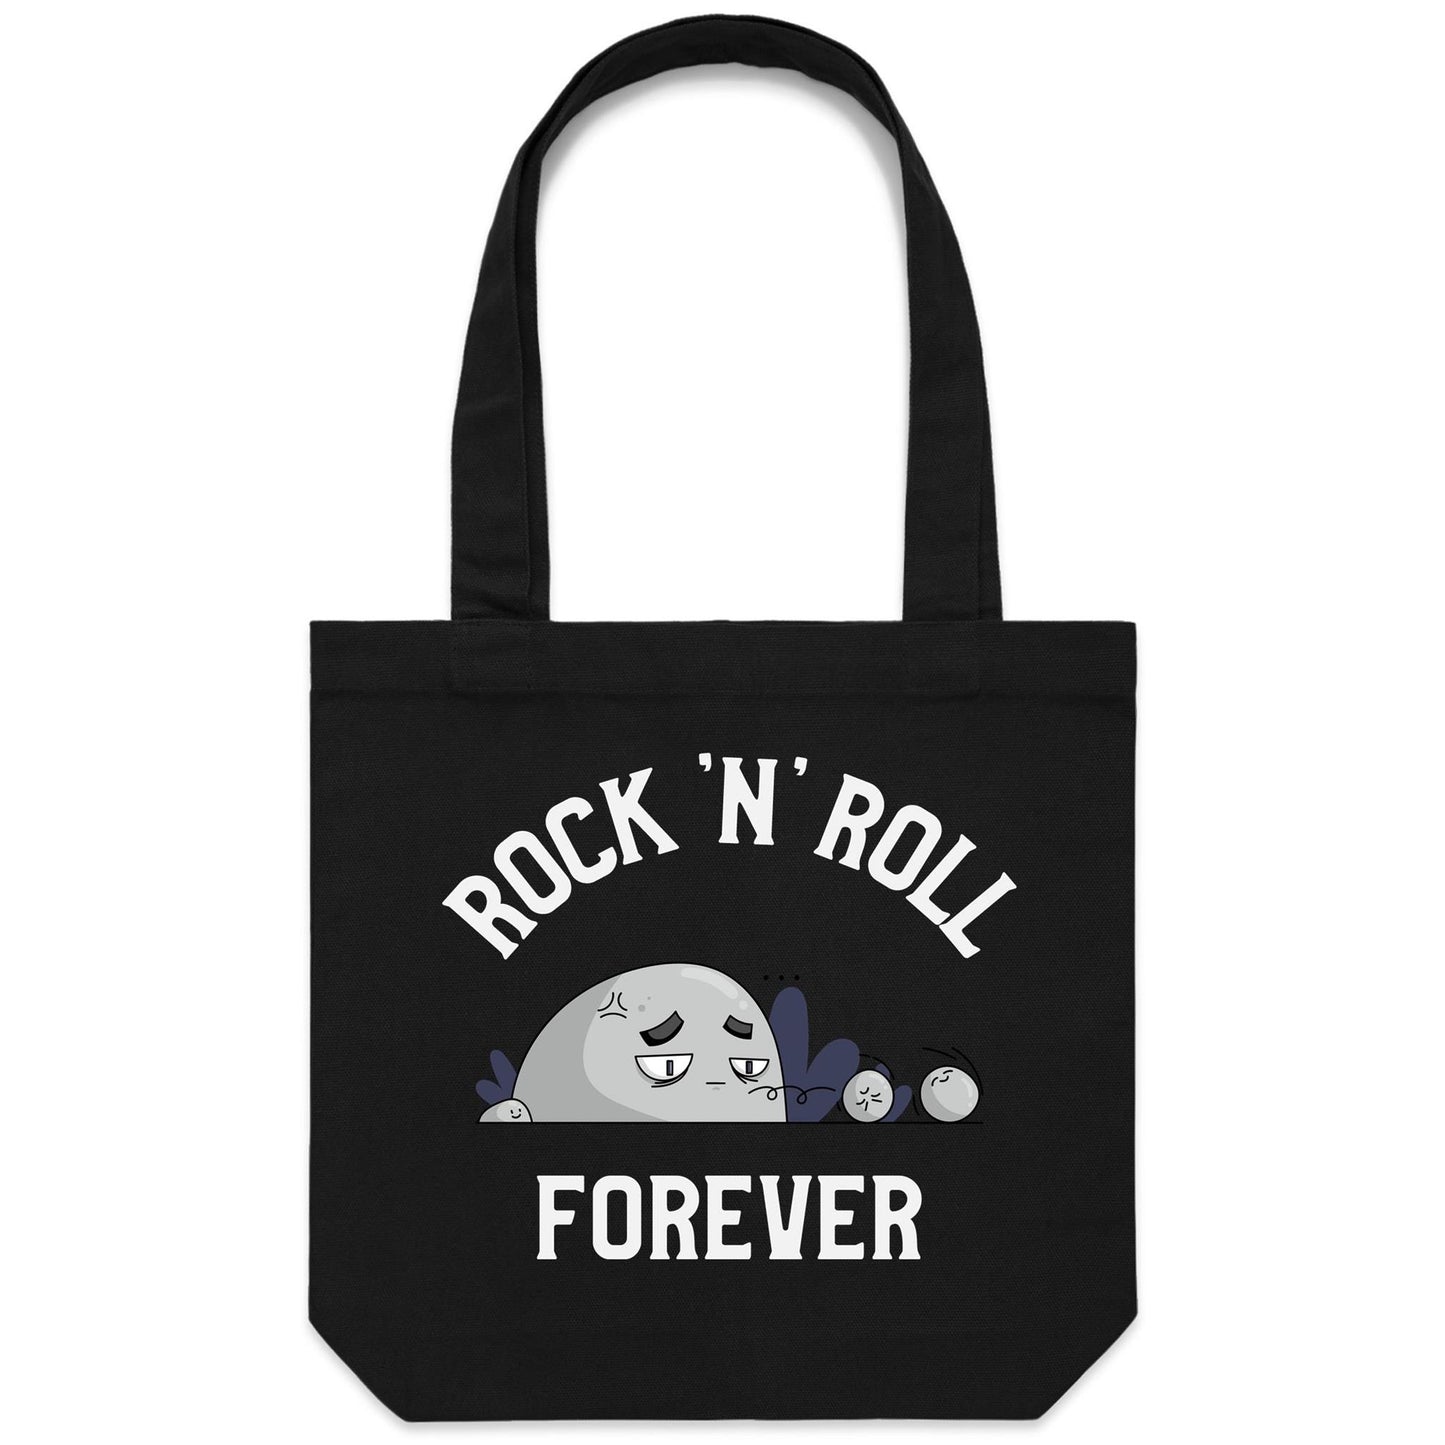 Rock 'N' Roll Forever - Canvas Tote Bag Black One Size Tote Bag Music